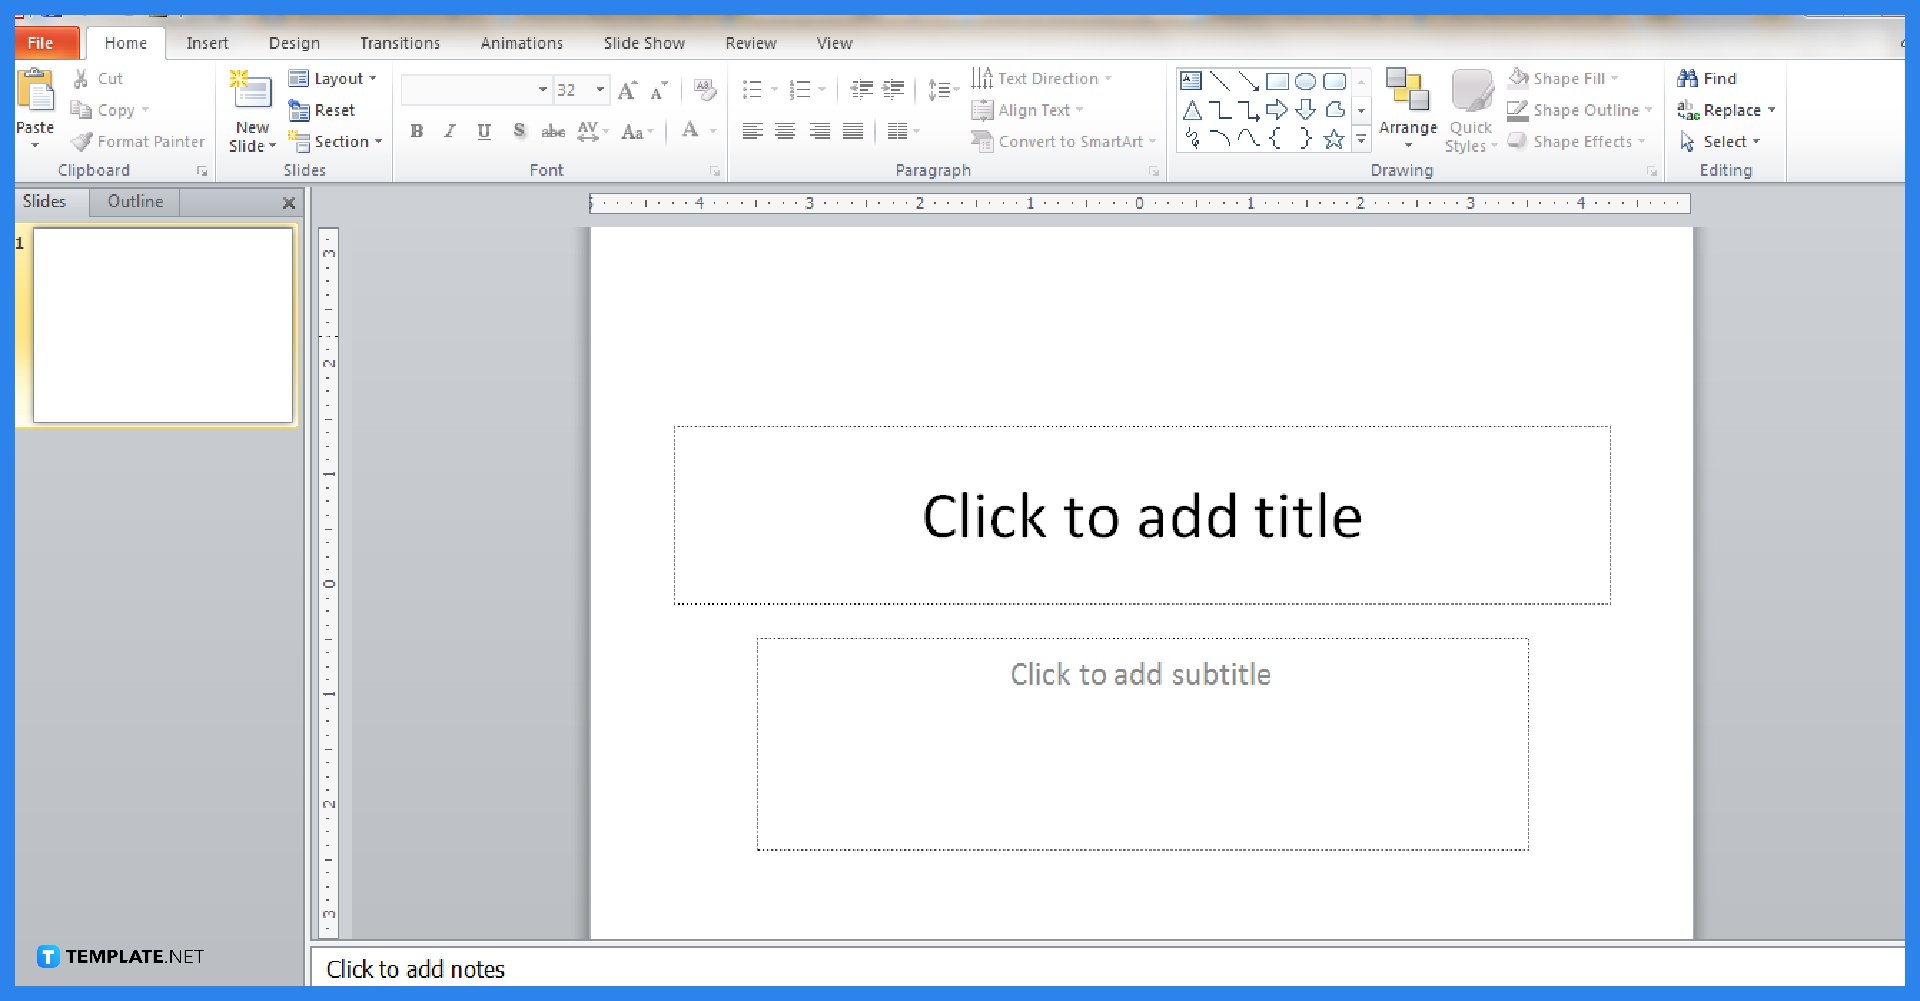 how-to-edit-chart-in-microsoft-powerpoint-step-1